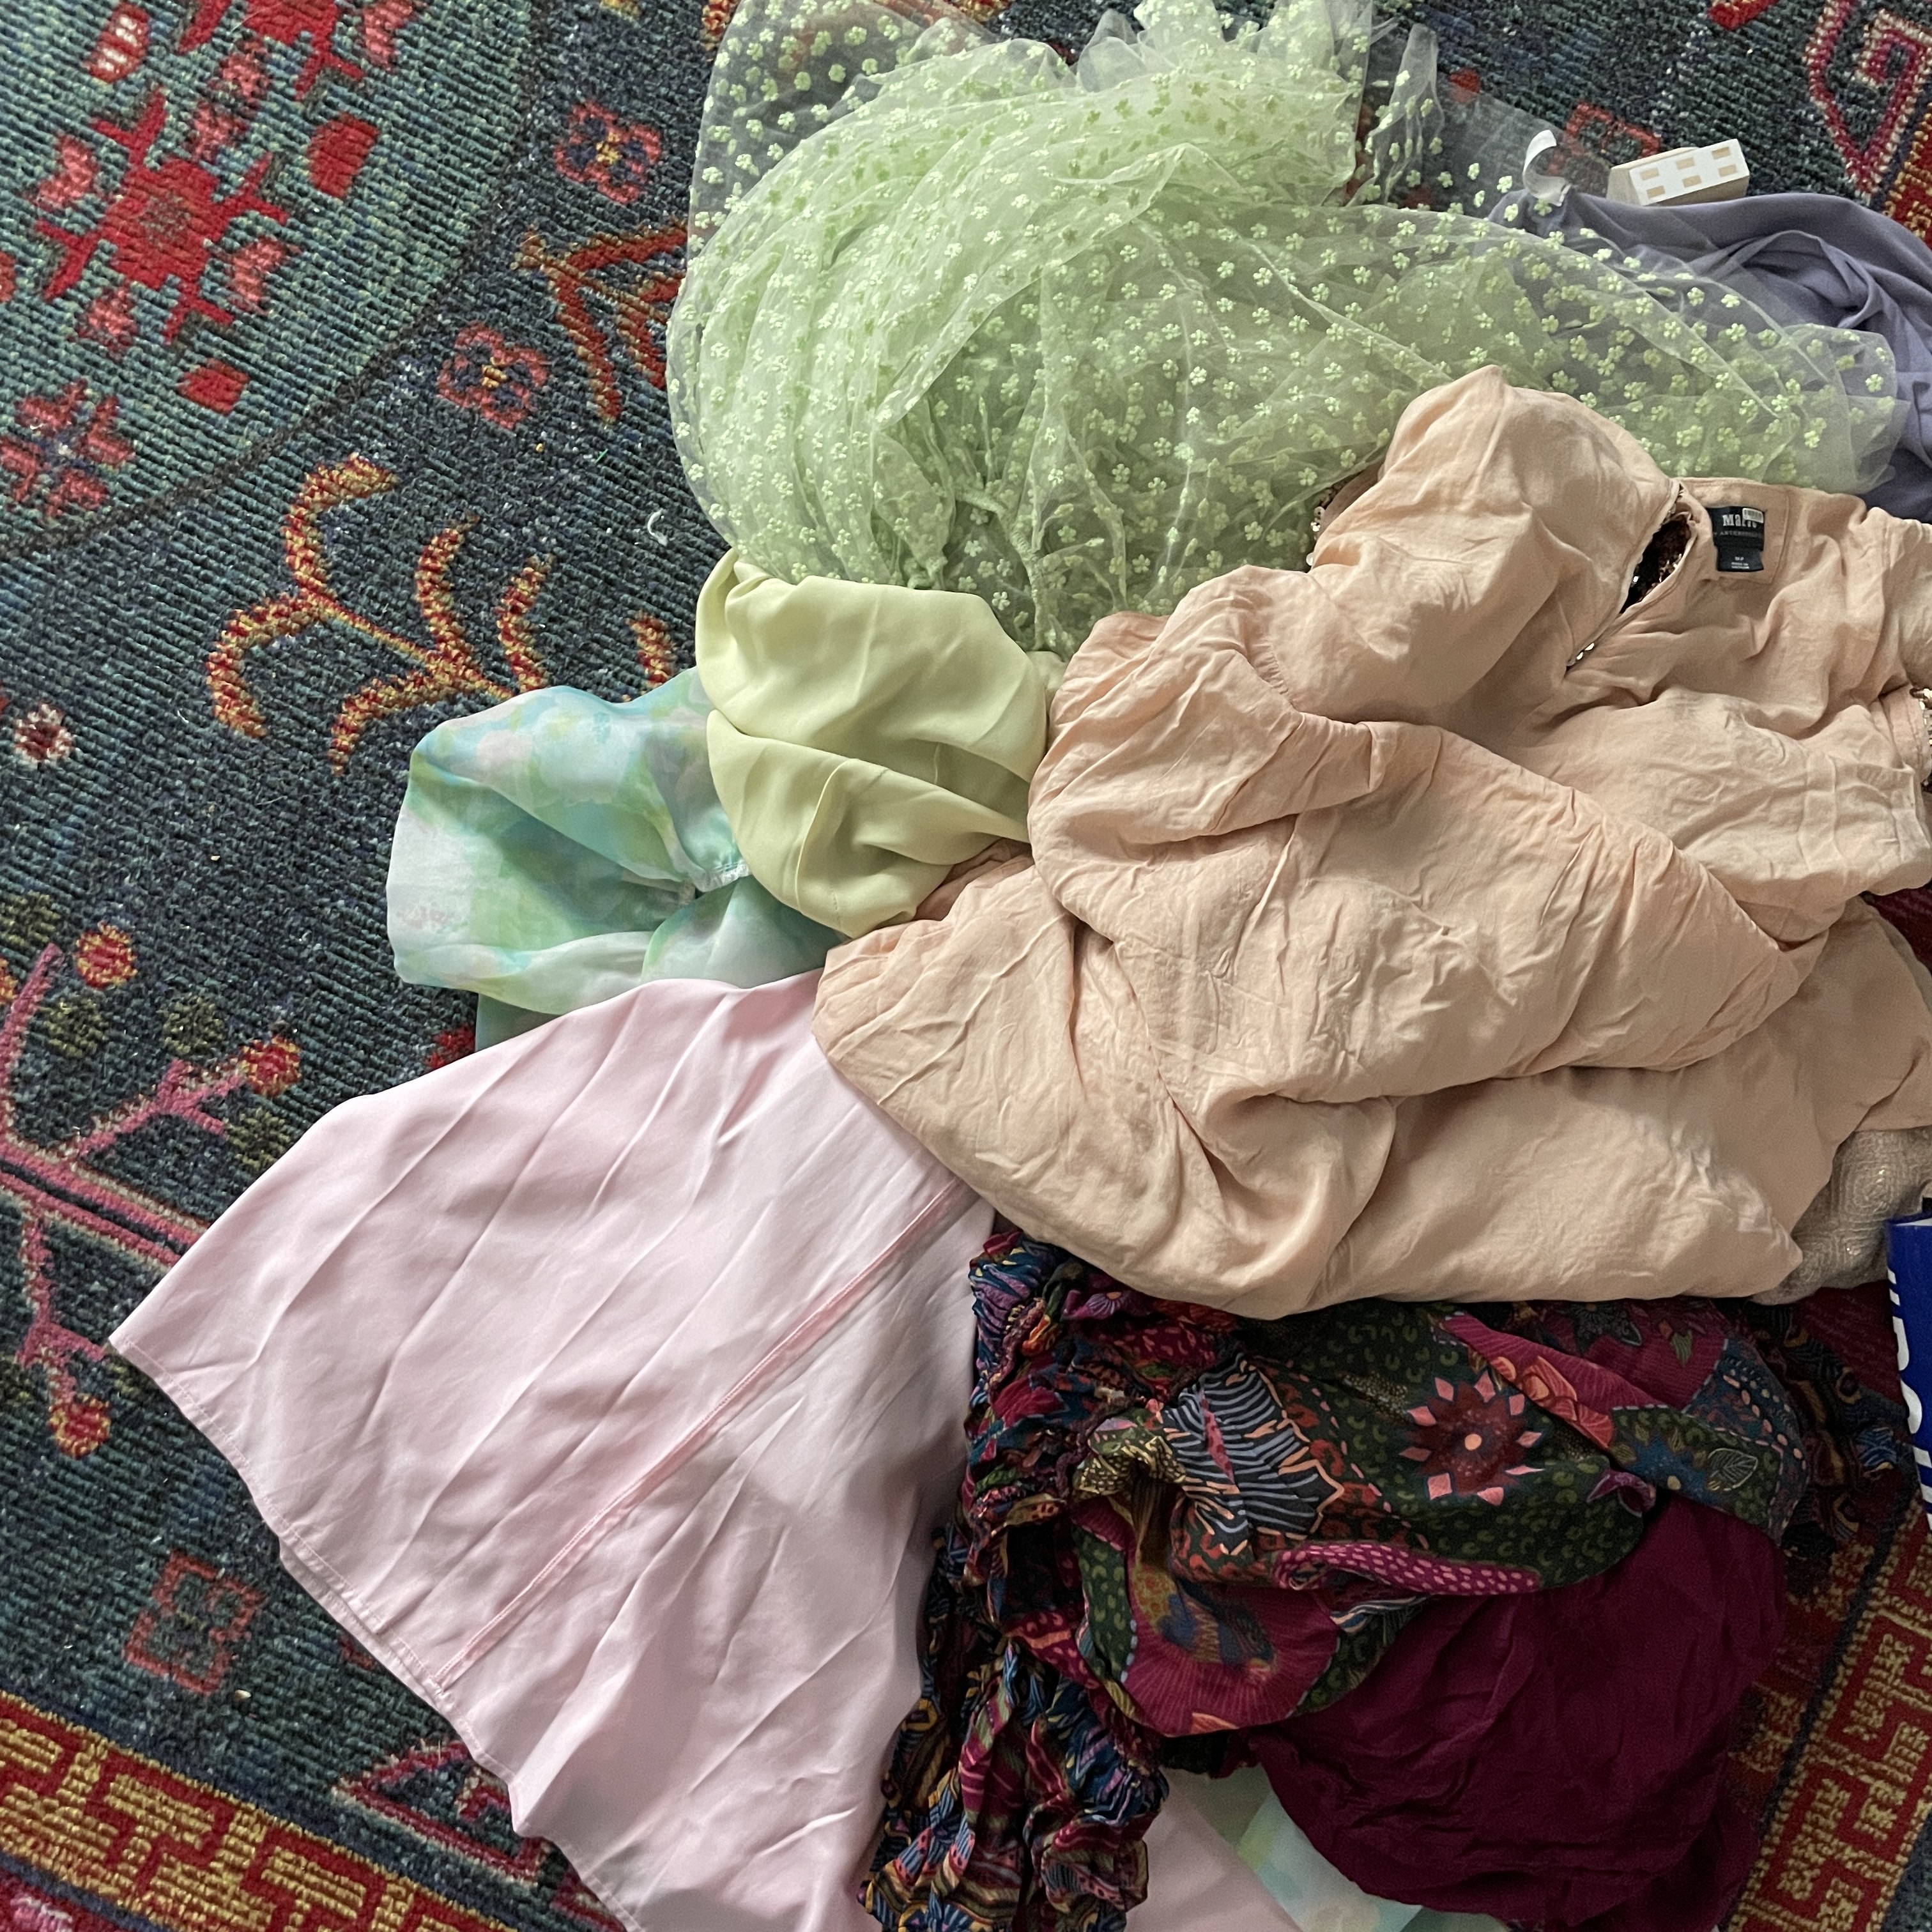 clothes in a pile on the floor